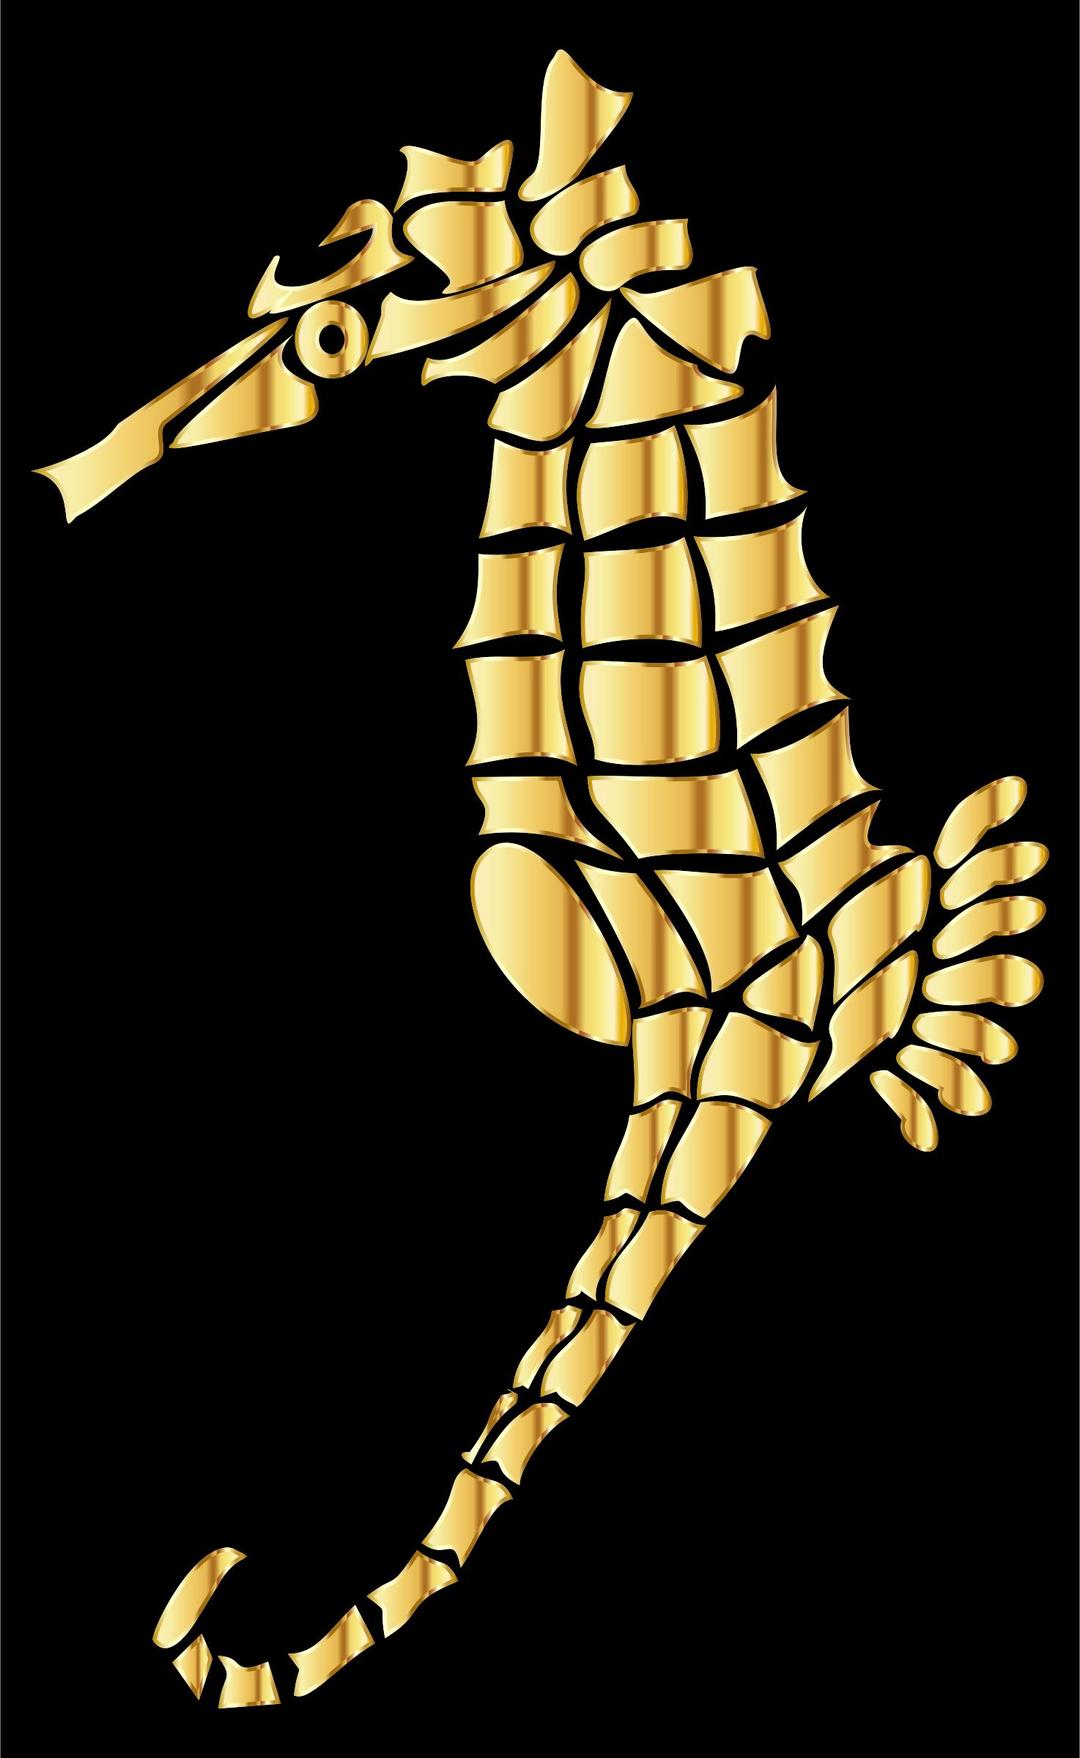 Gold Stylized Seahorse Silhouette png transparent